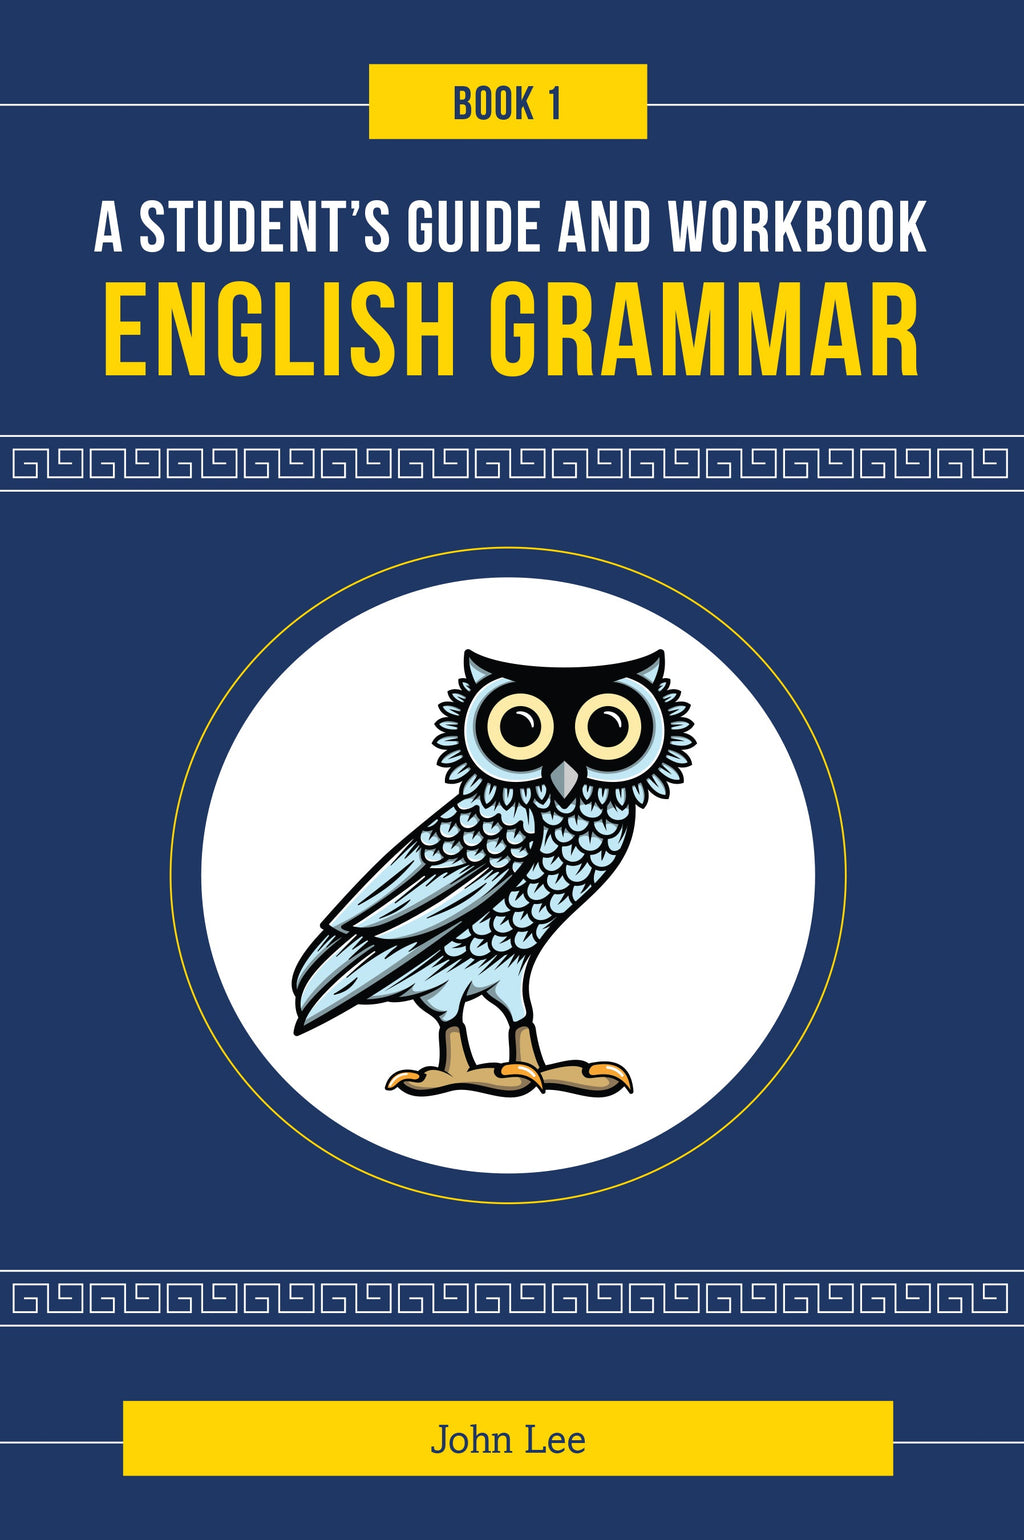 English Grammar Book 1: A student's guide and workbook